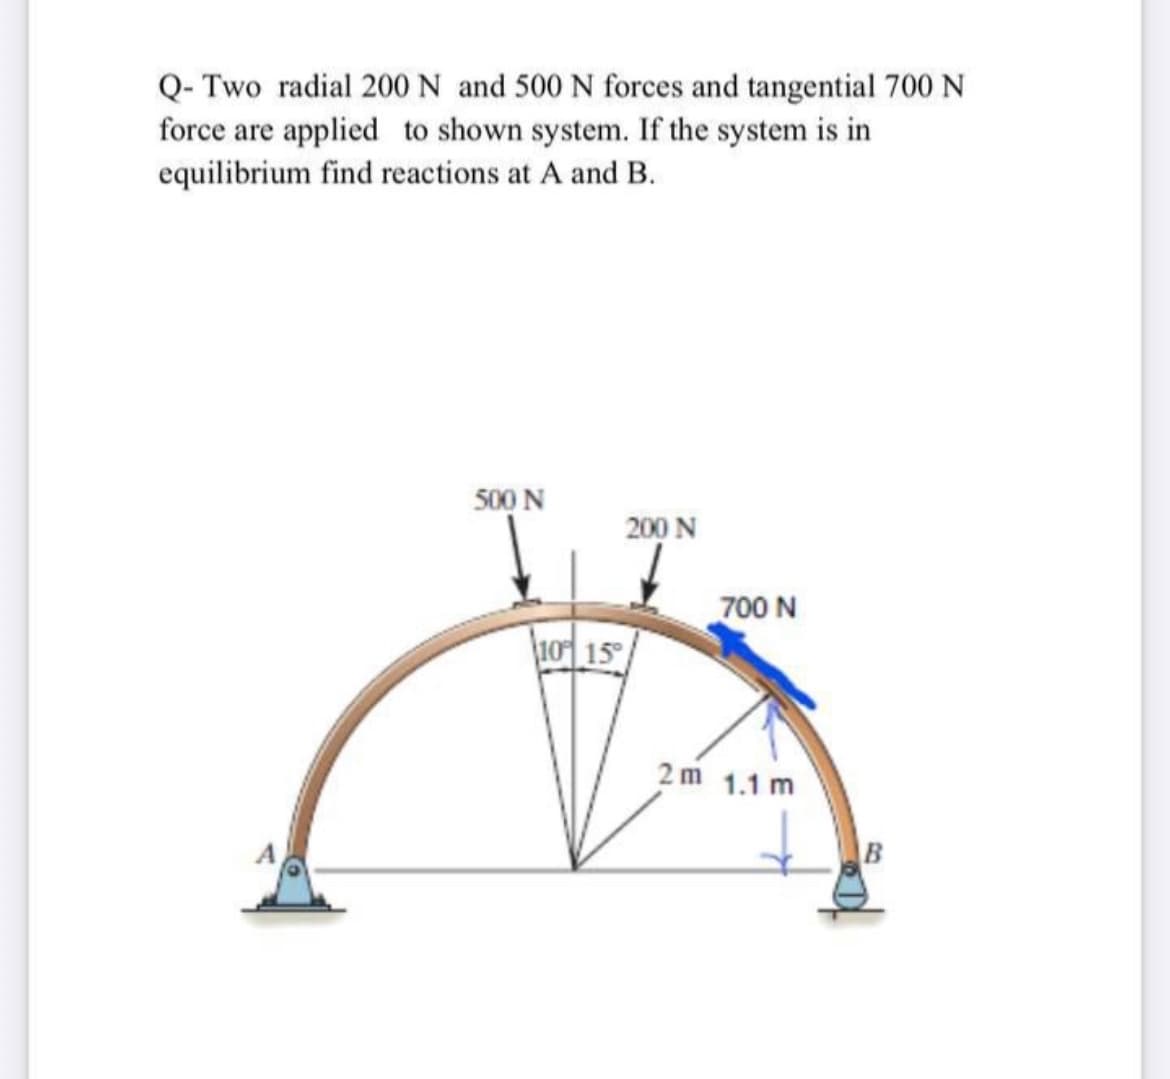 Q- Two radial 200 N and 500 N forces and tangential 700 N
force are applied to shown system. If the system is in
equilibrium find reactions at A and B.
500 N
200 N
700 N
10 15
2m 1.1 m
